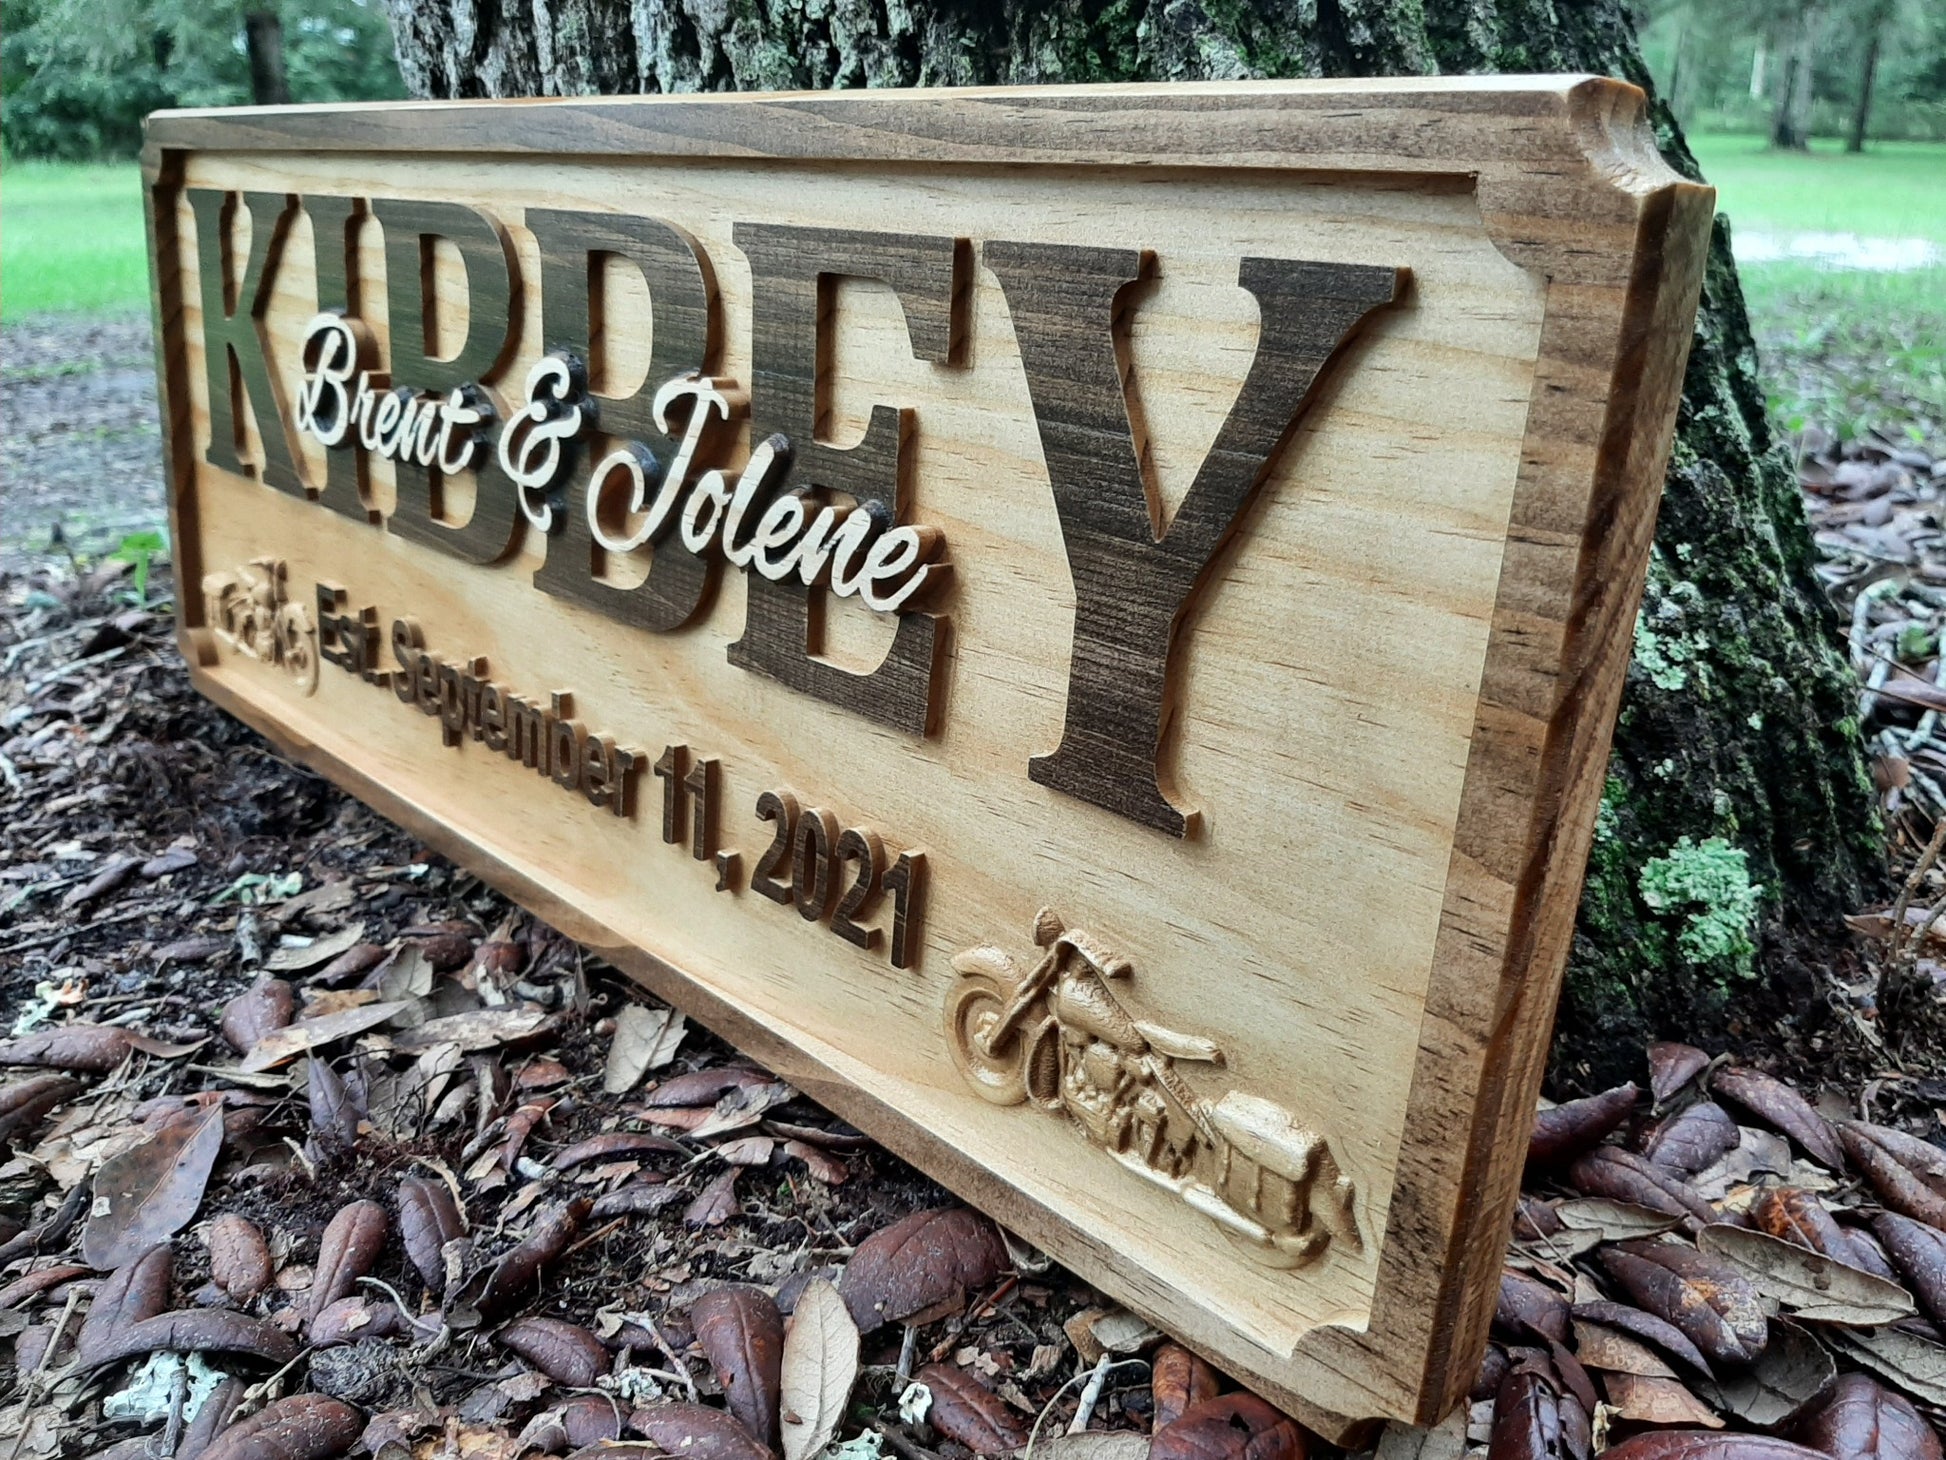 Custom Personalized wooden Name sign, established date sign, wedding gift ideas with Harley motorcycles. Made in the USA.